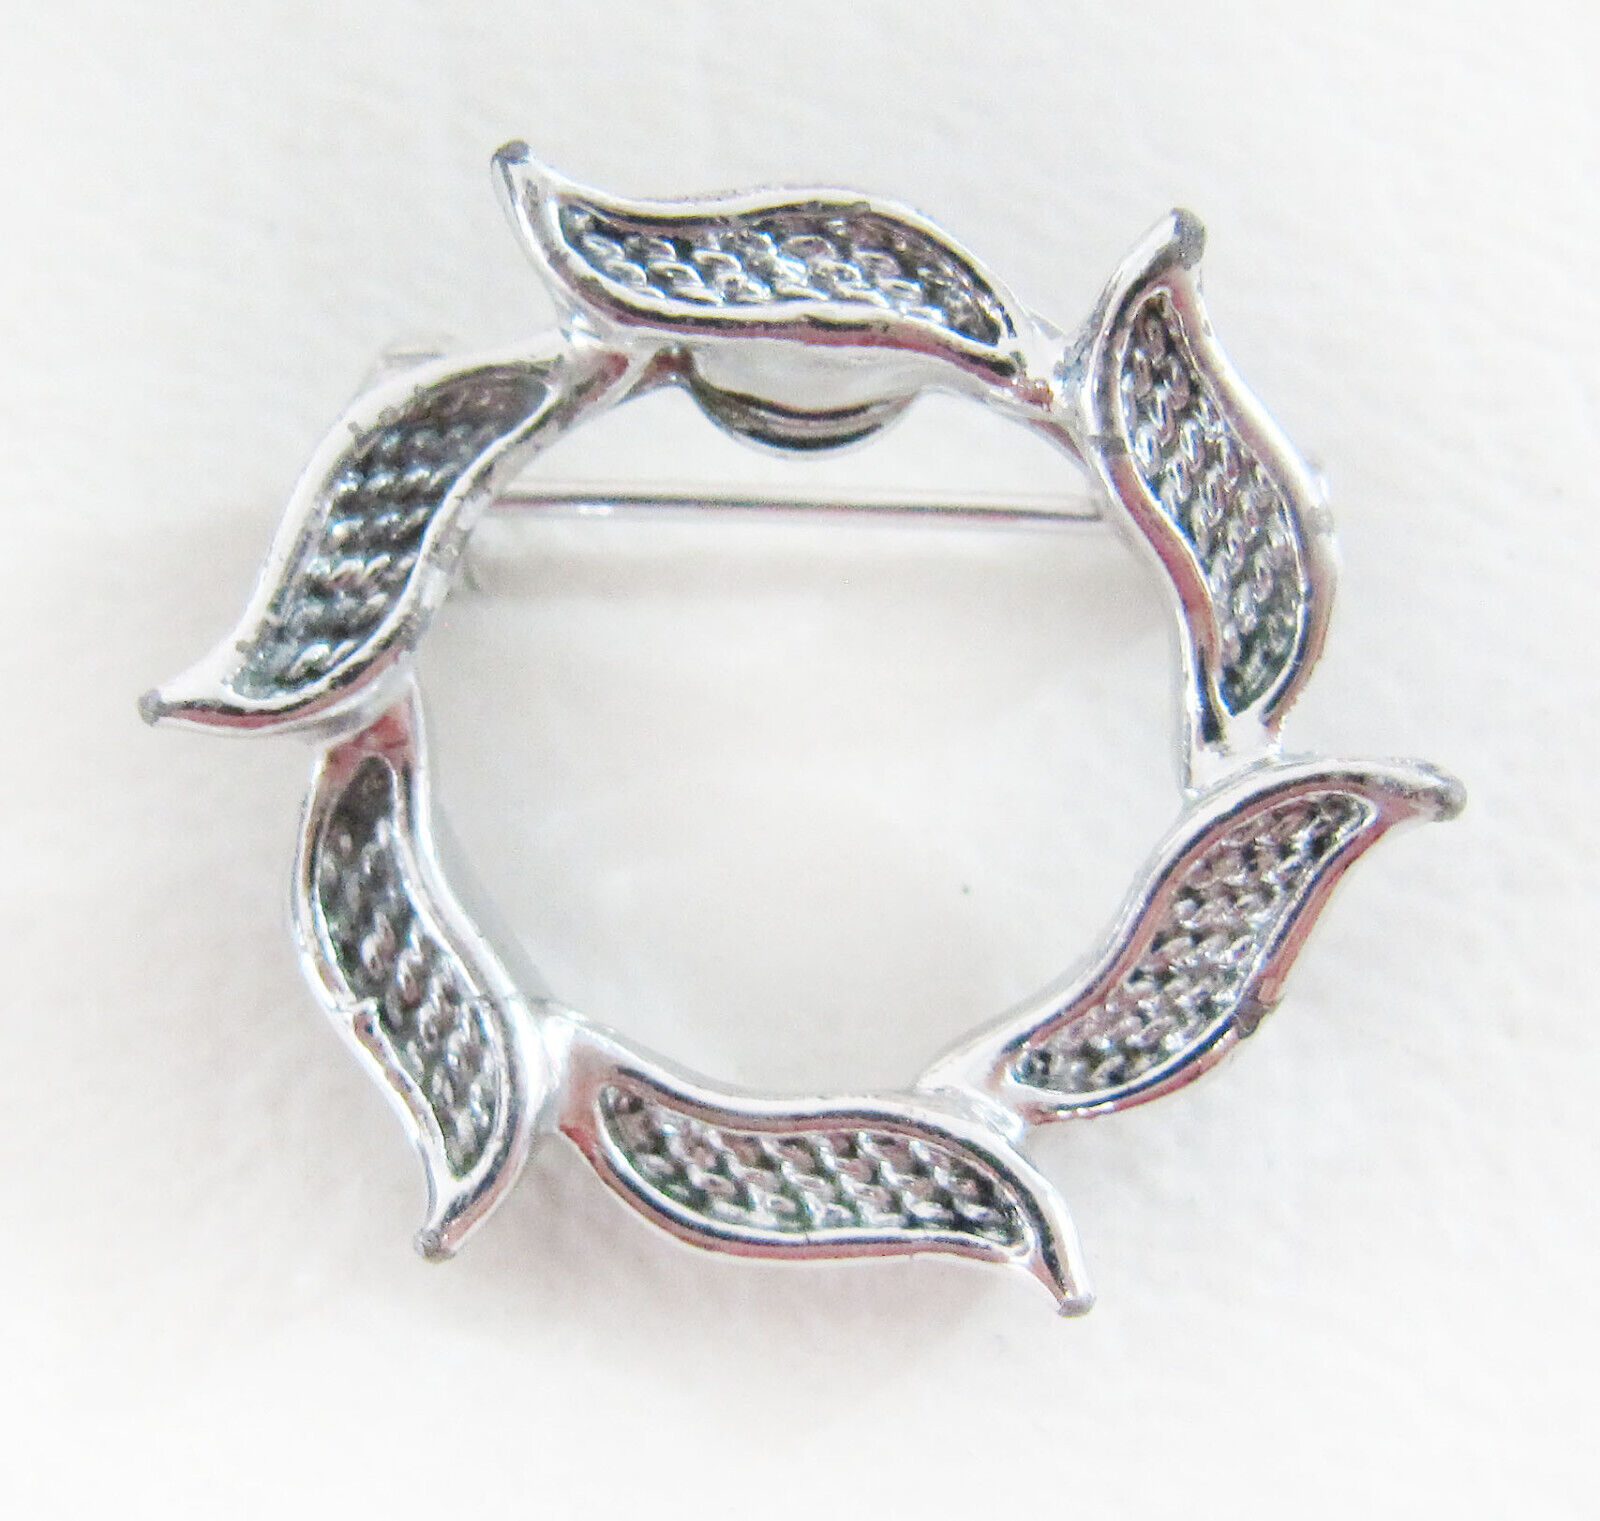 Primary image for Vintage Gerry's Silver Leaf Circle Pin Brooch